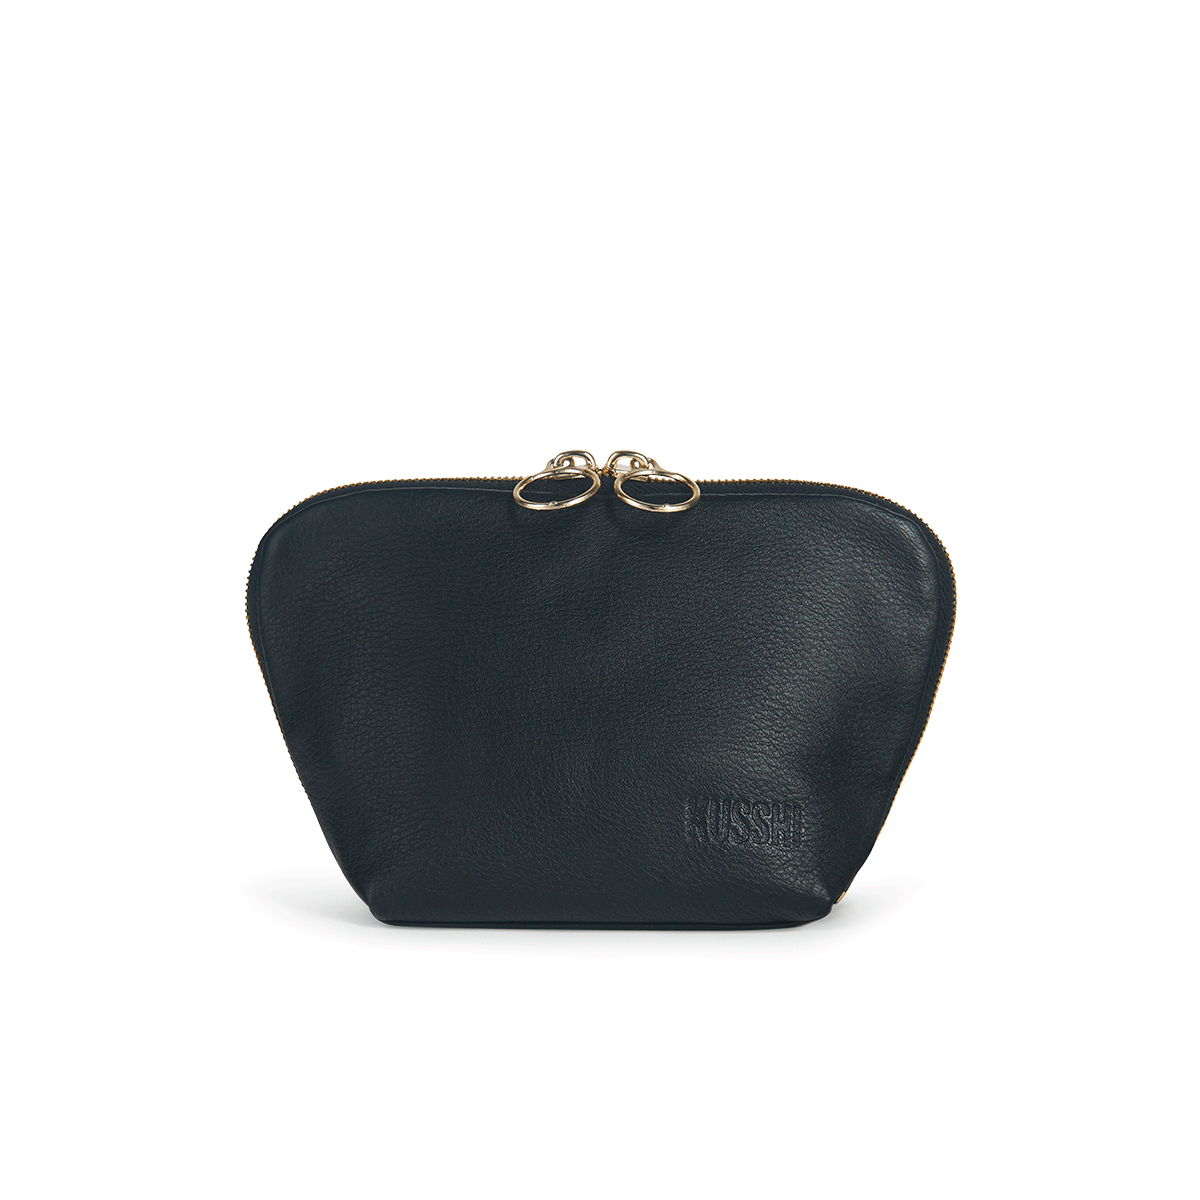 color: Everyday+Luxurious Black Leather with Cool Grey Interior; alt: Everyday Small Makeup Bag | KUSSHI